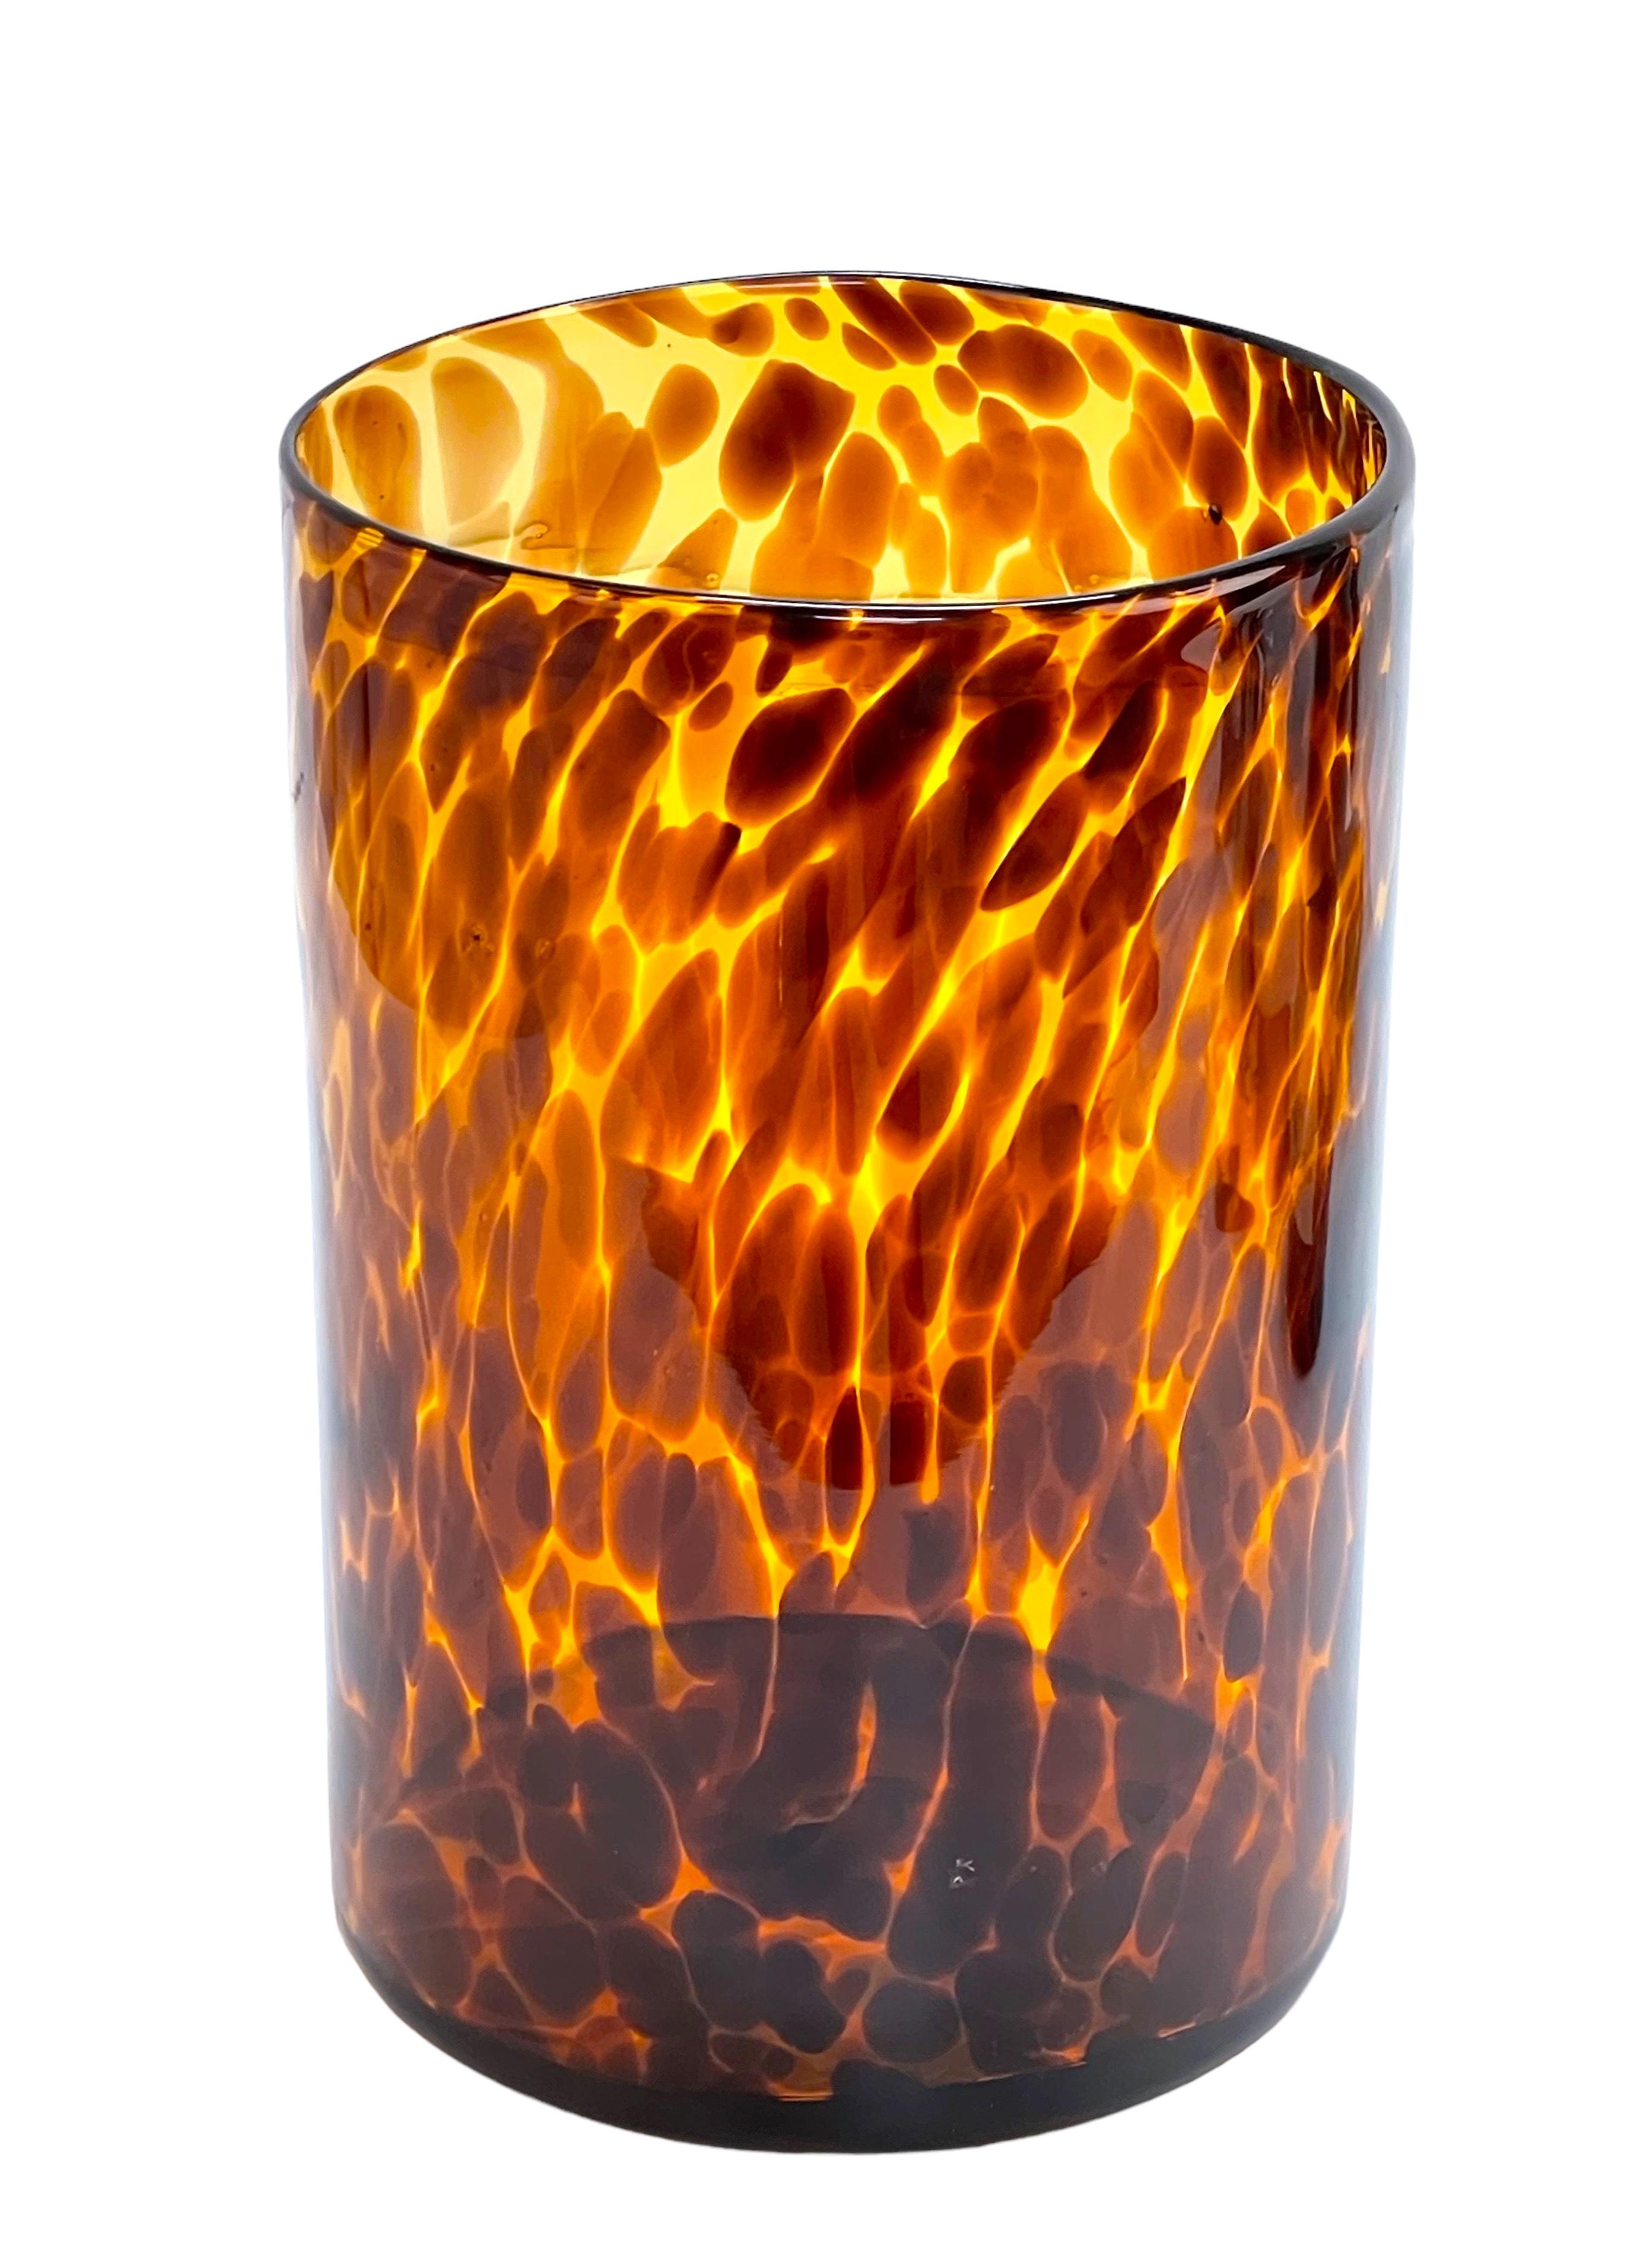 Midcentury Large Italian Orange and Brown Leopard Glass Artistic Vase, 1980s For Sale 7